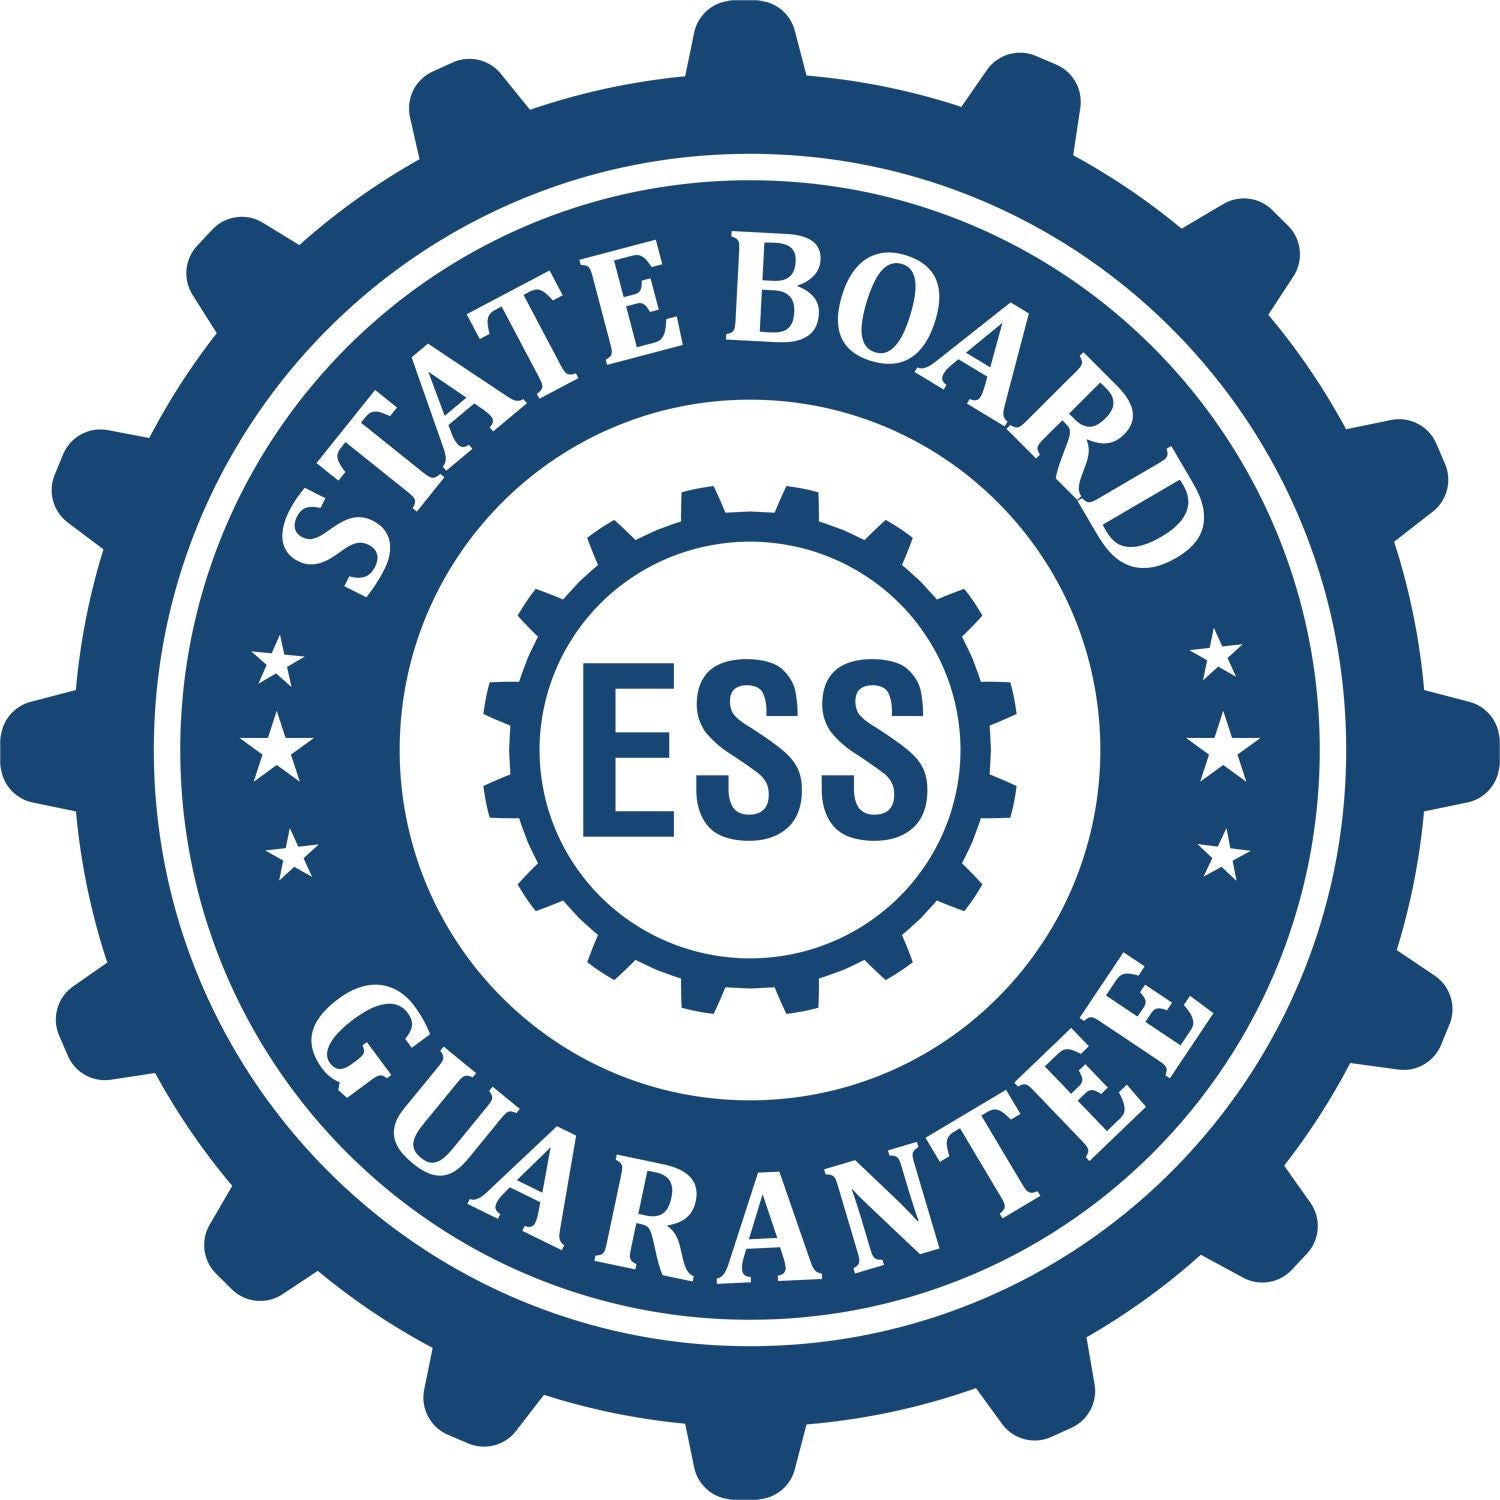 An emblem in a gear shape illustrating a state board guarantee for the Oregon Professional Engineer Seal Stamp product.